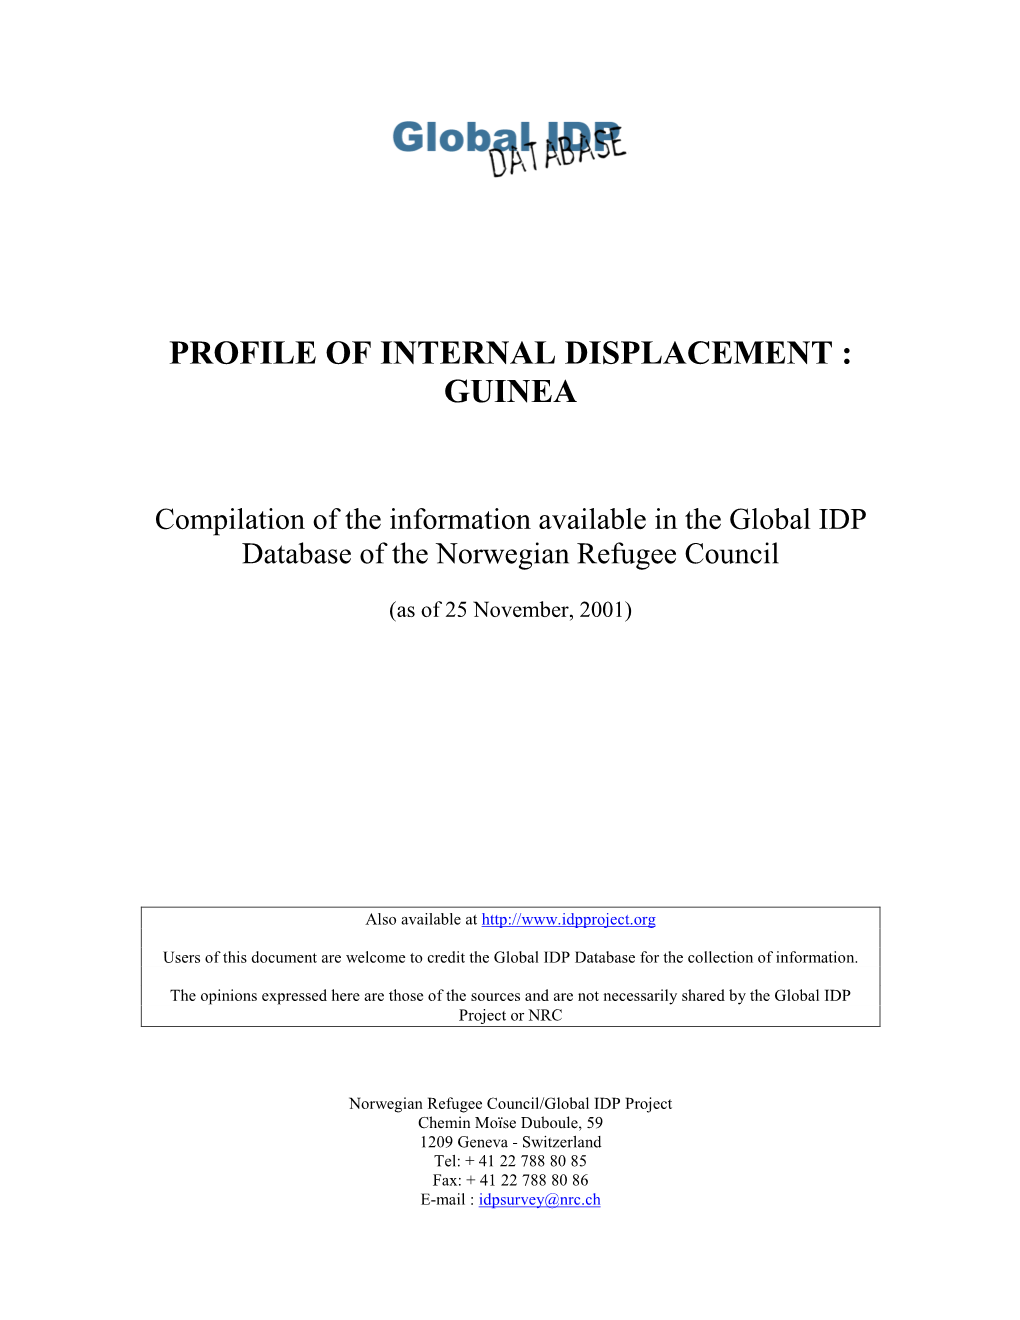 Profile of Internal Displacement : Guinea